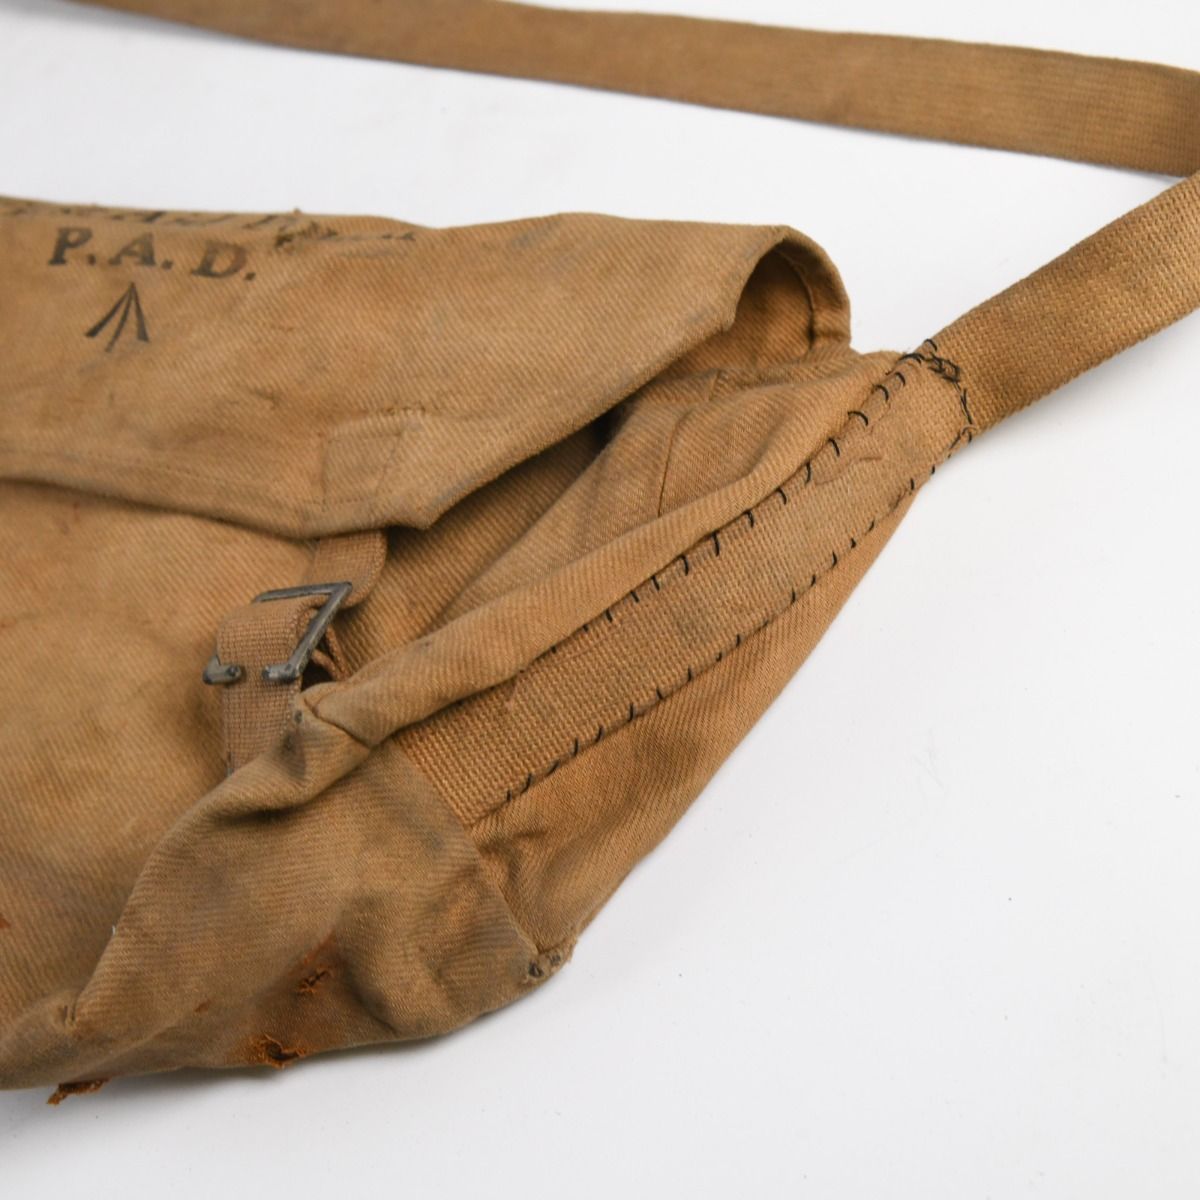 Vintage British Military First Aid Pouch P.A.D.